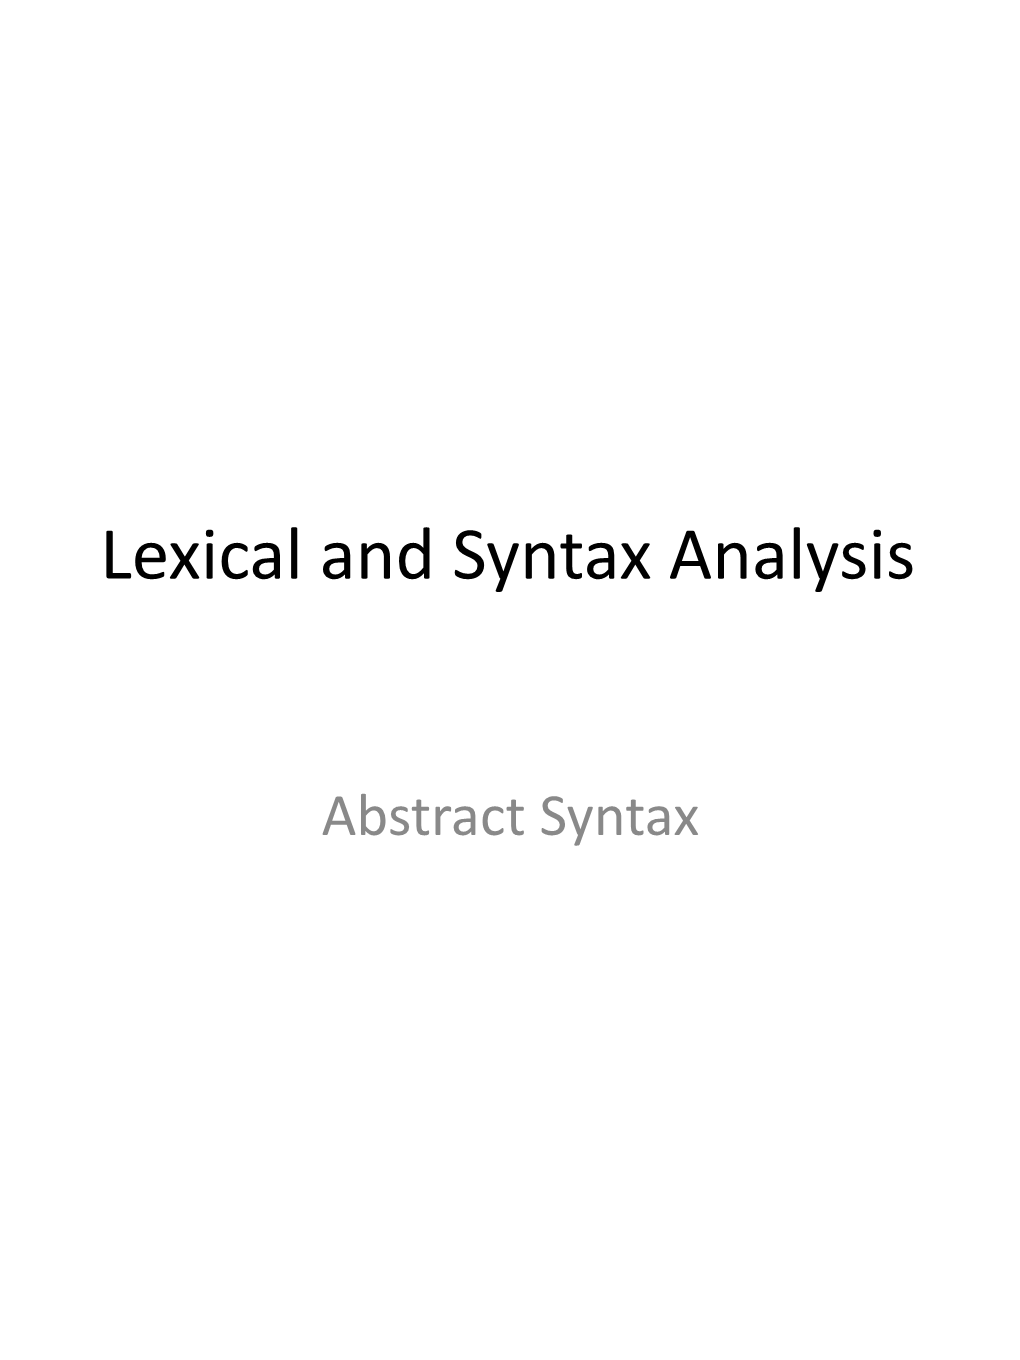 Abstract Syntax What Is Parsing?